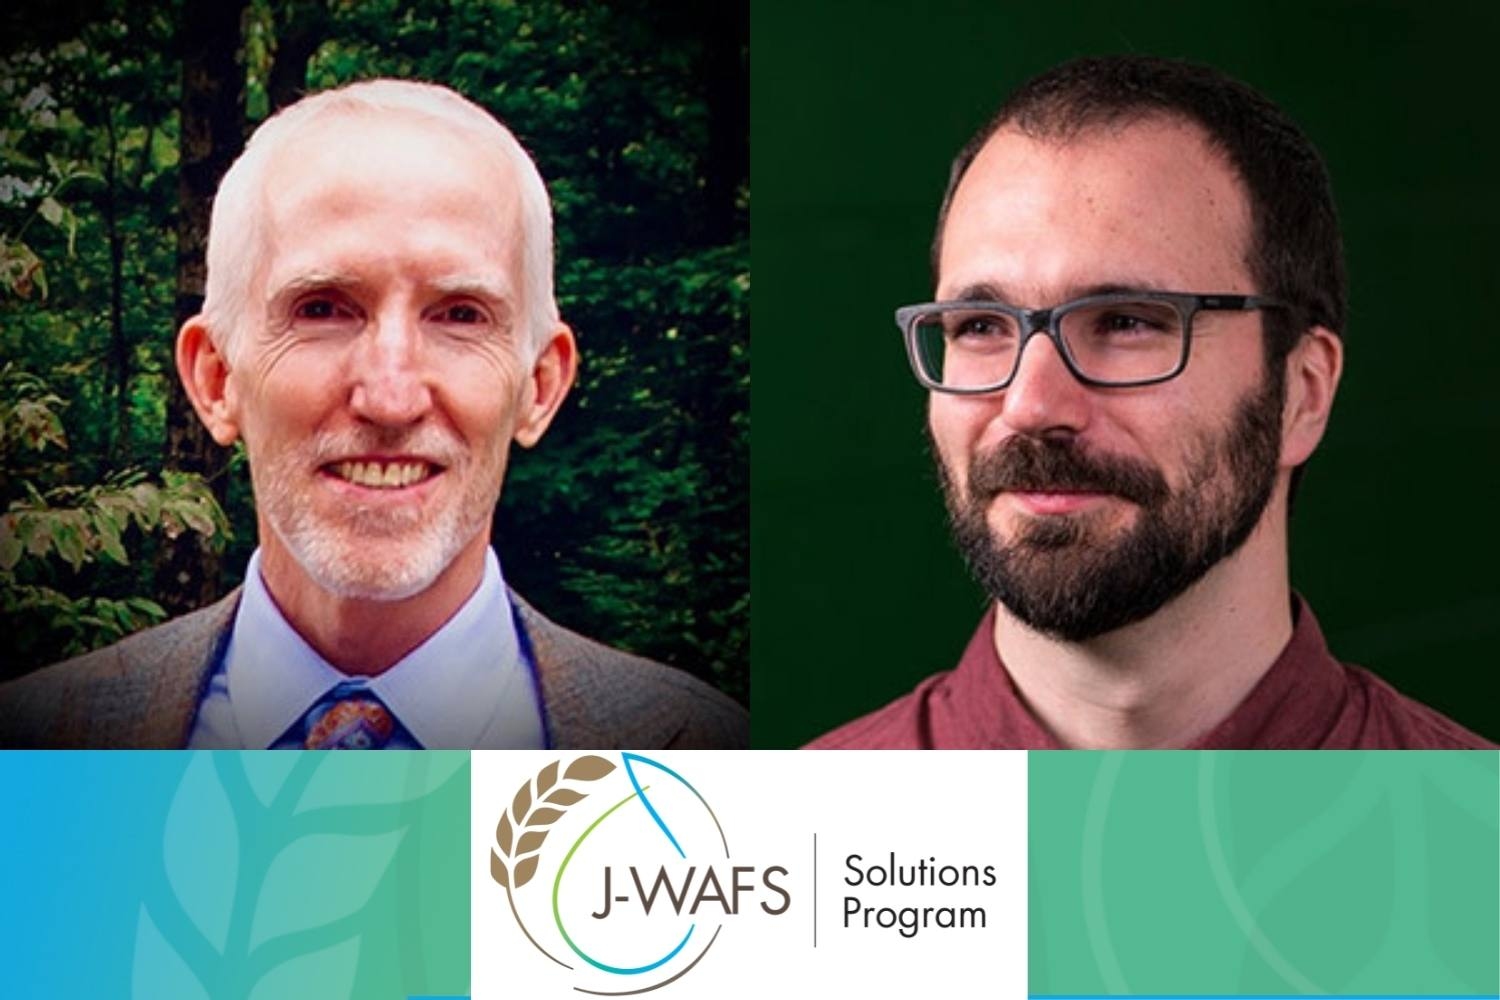 J-WAFS awards $150K Solutions grant to Patrick Doyle and team for rapid removal of micropollutants from water